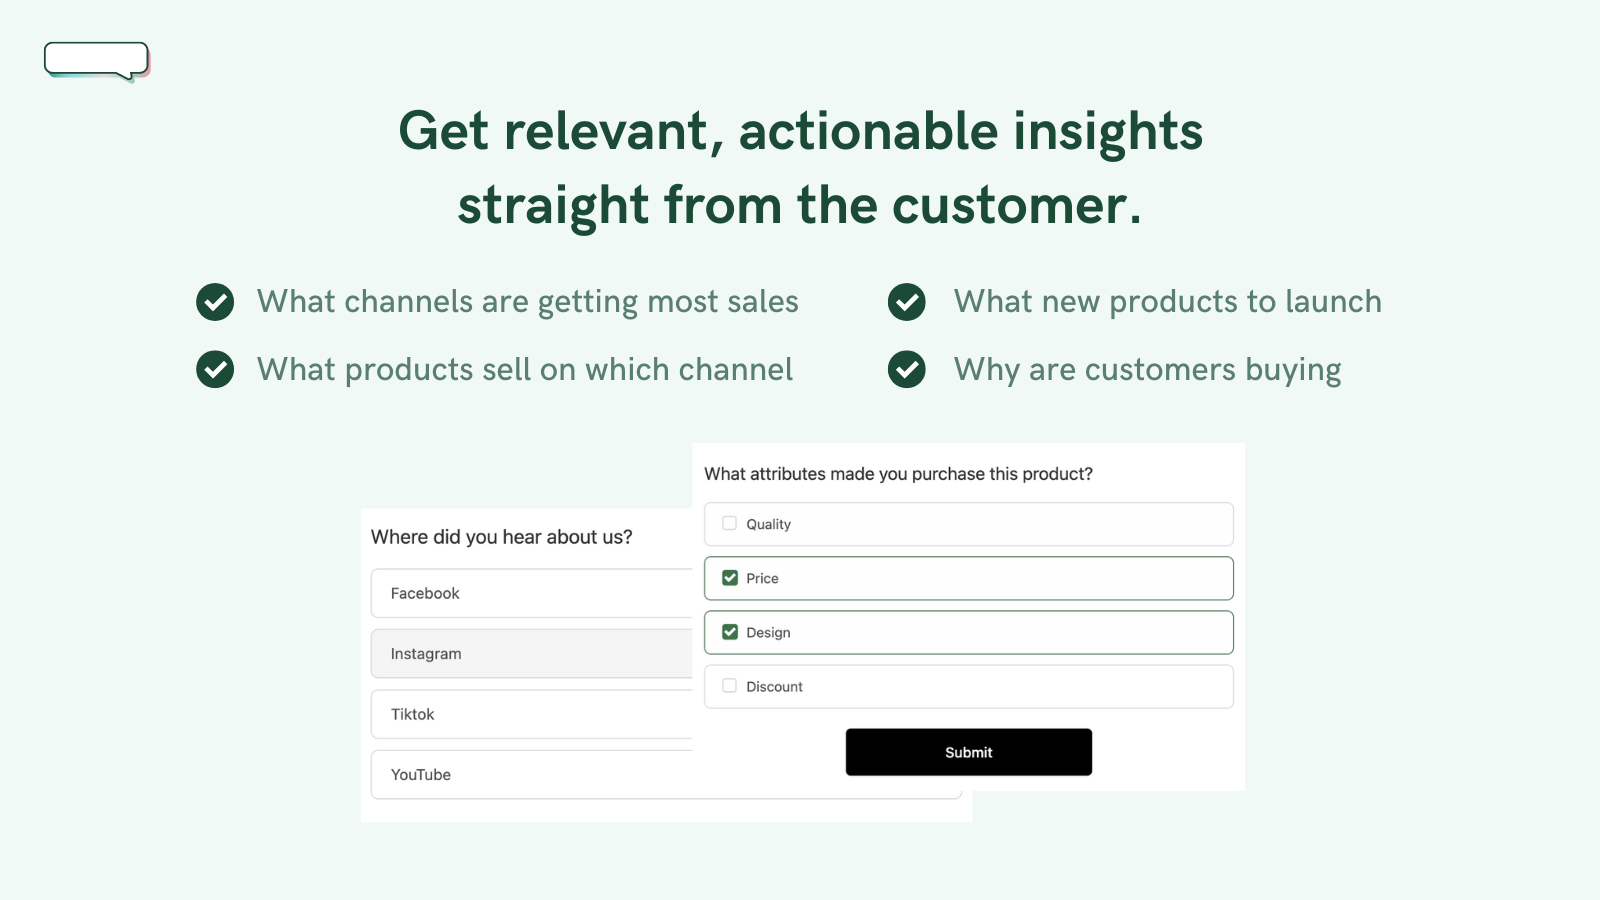 Get relevant, actionable insights straight from the customer.